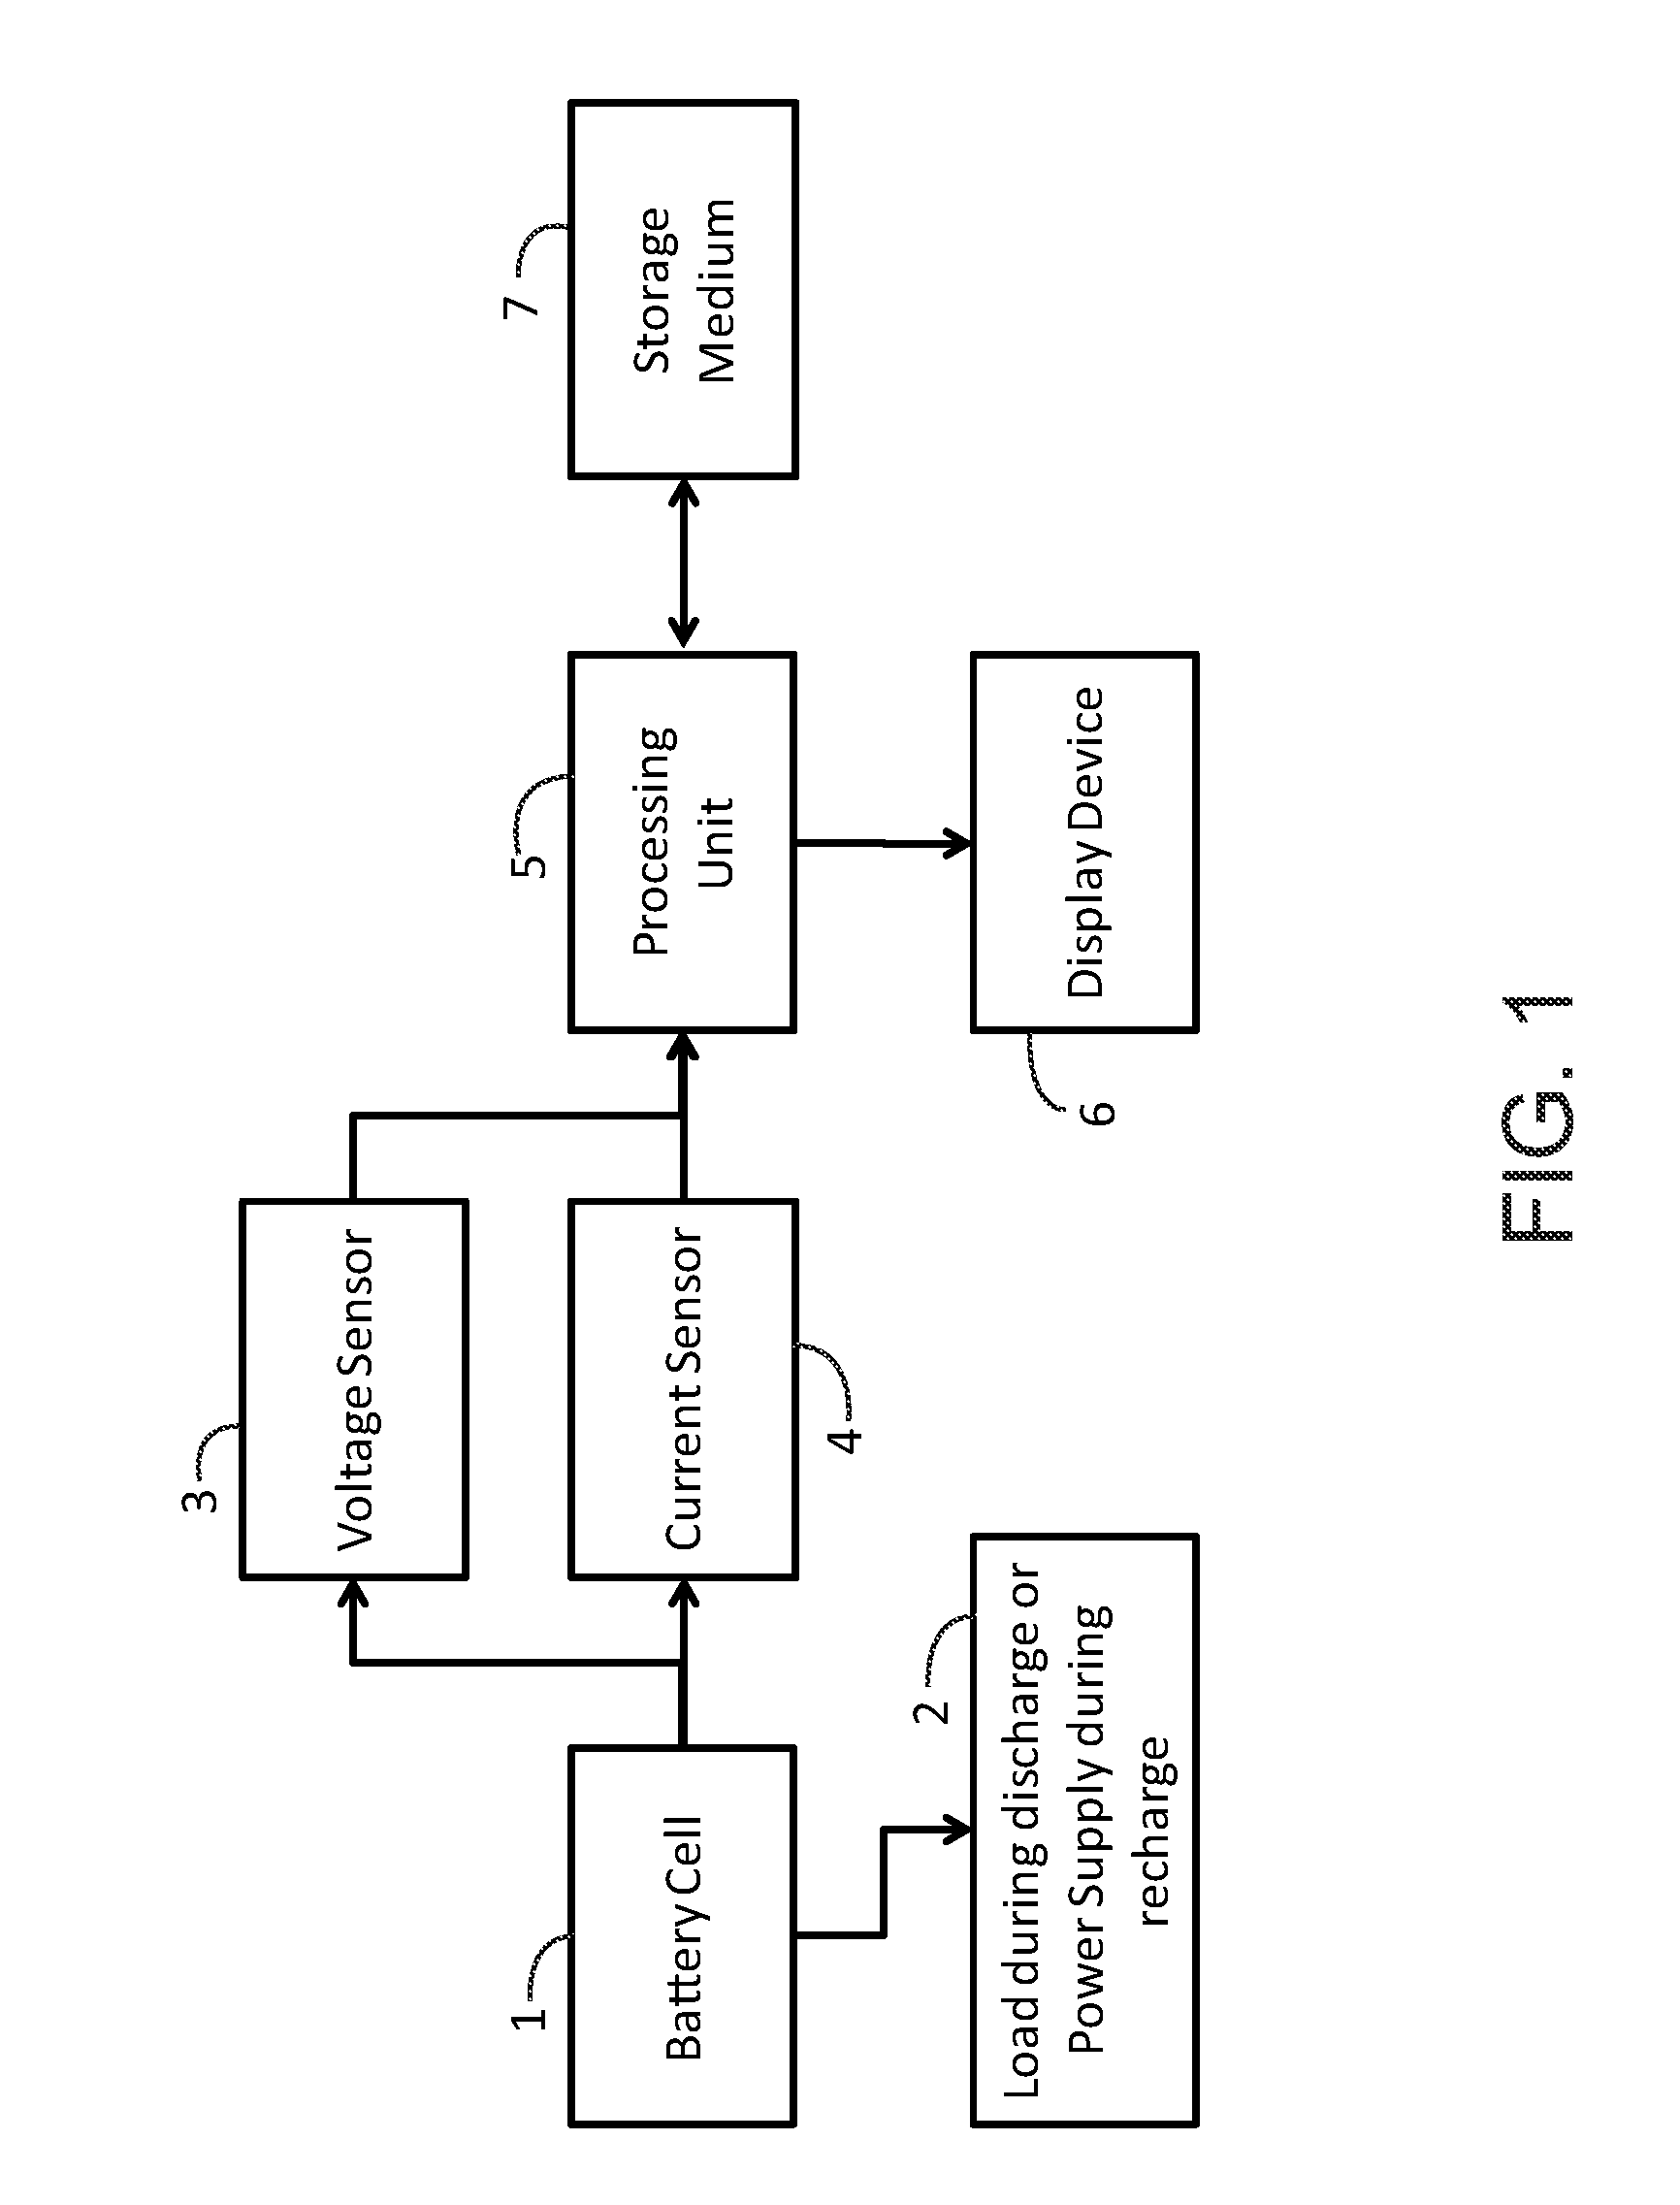 Method and system for operating a battery in a selected application